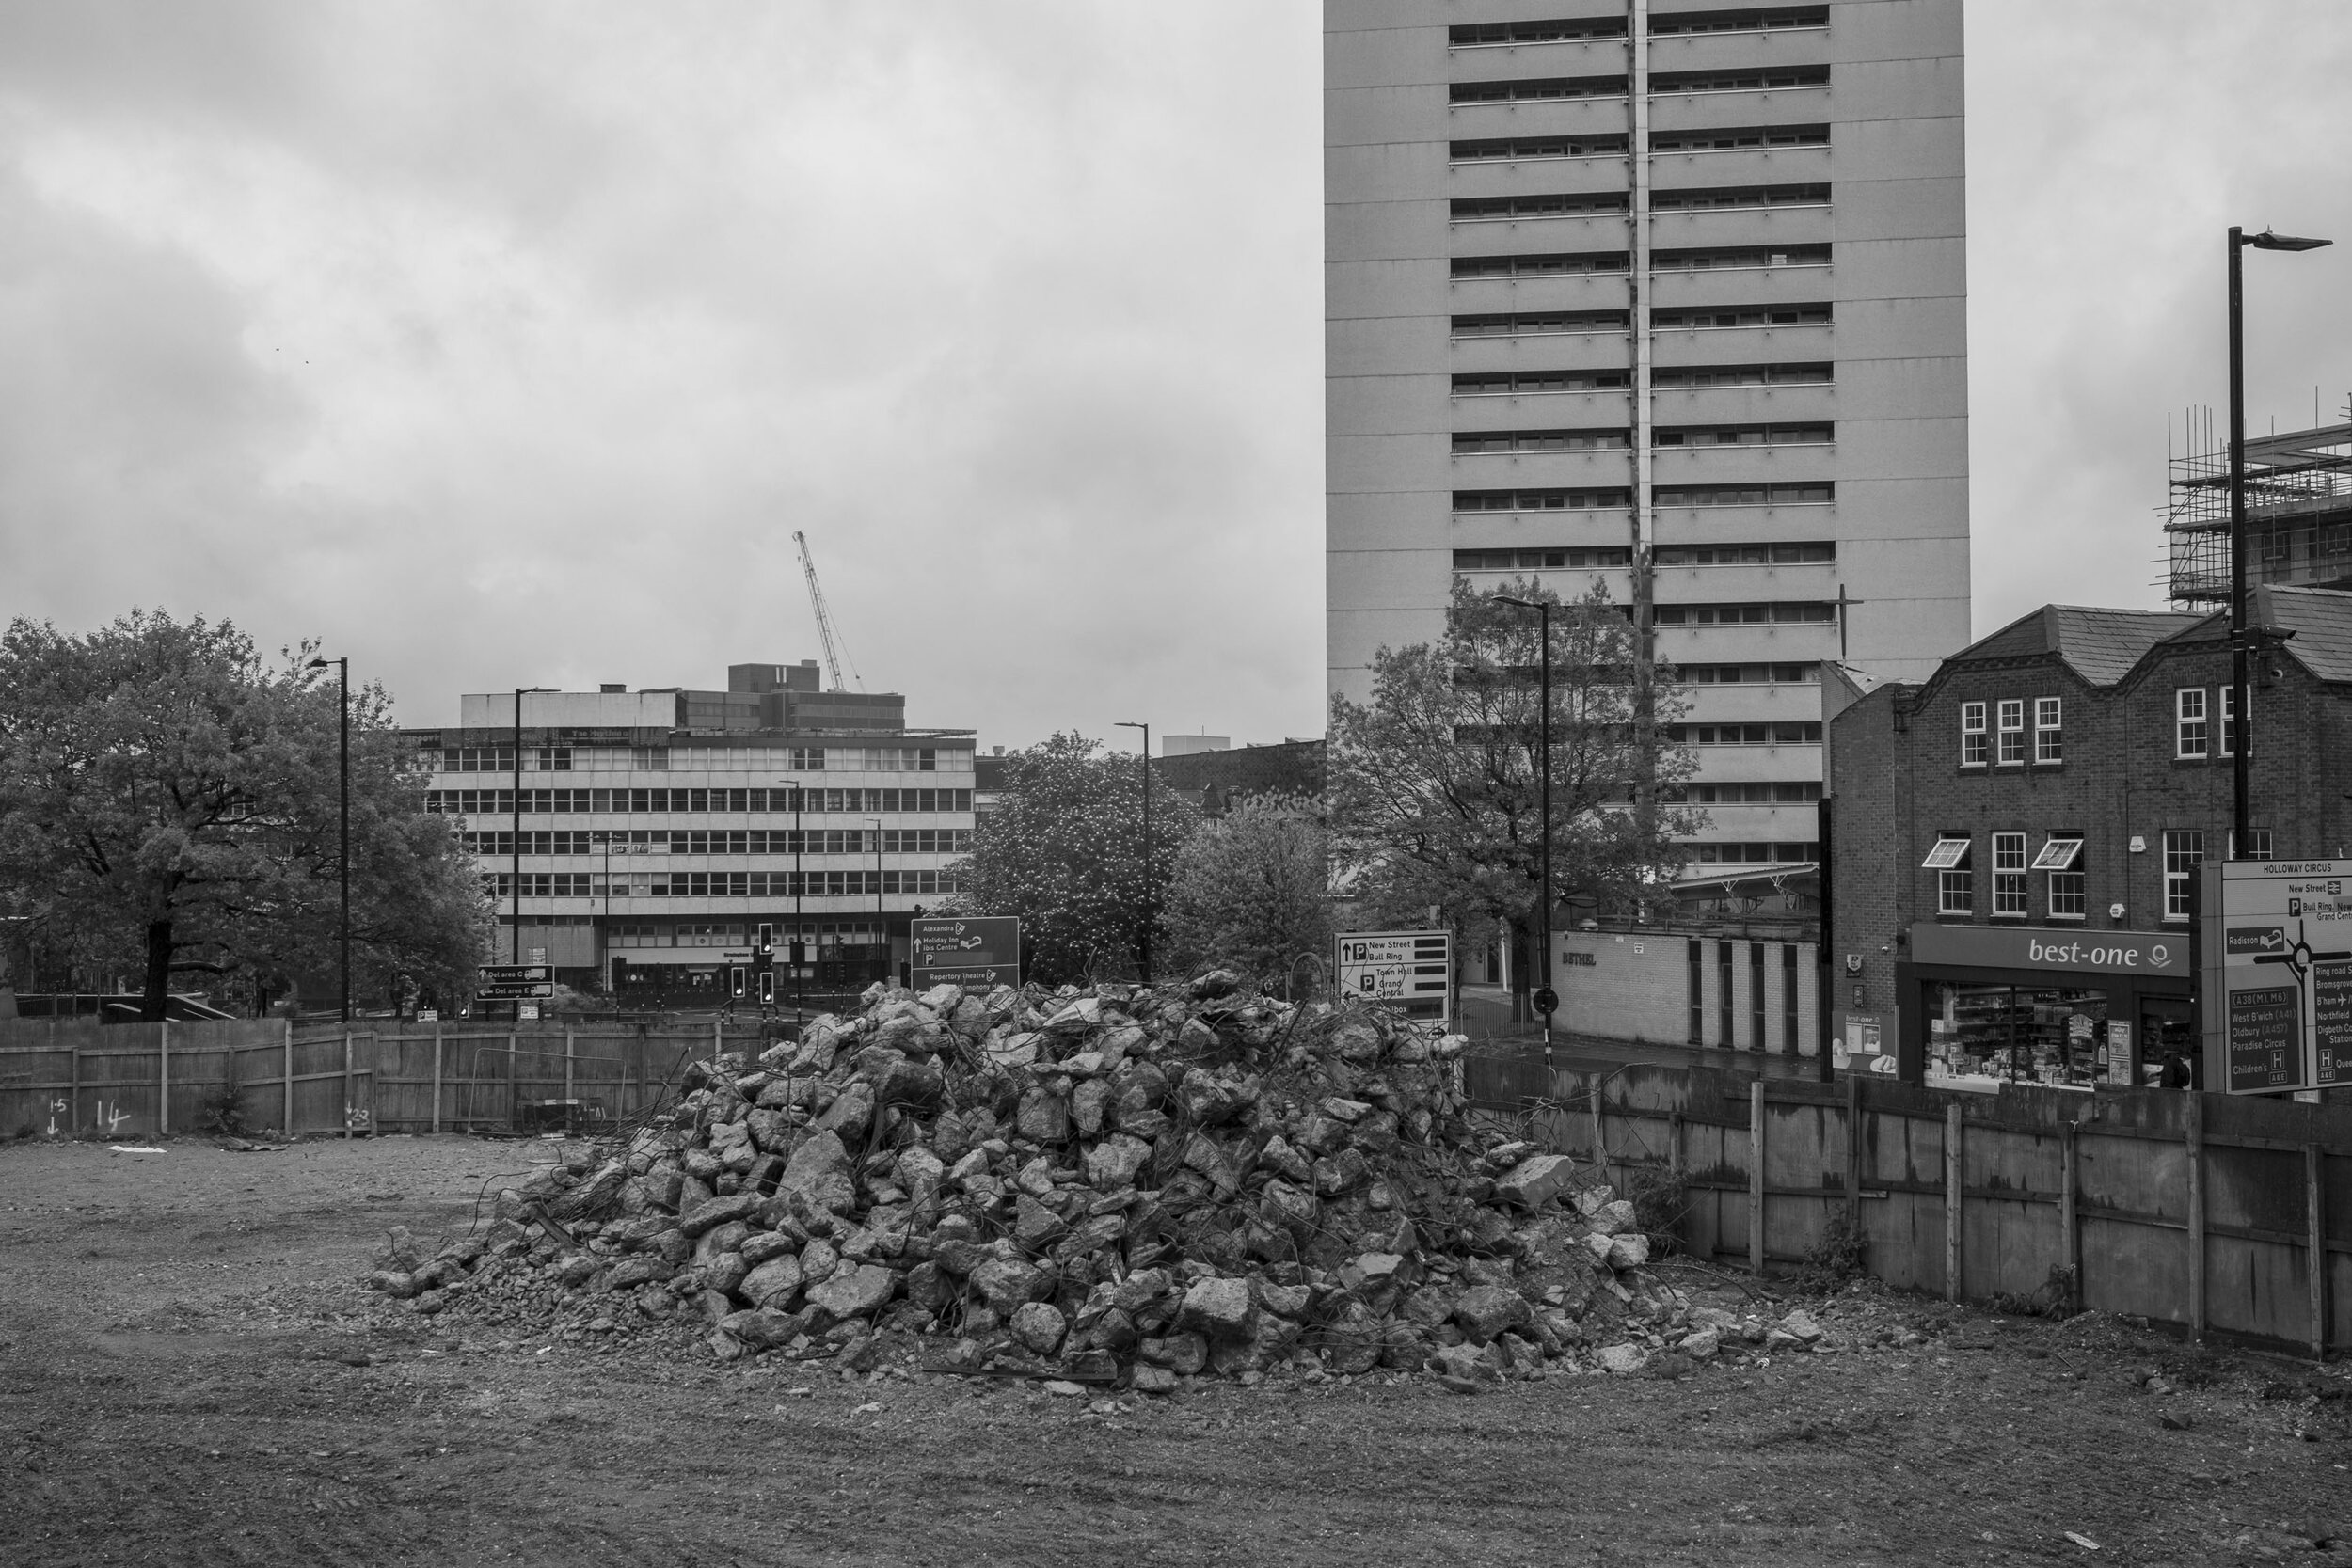  Construction project on hold near Holloway Circus in view of Clydesdale Tower residential social housing. April 2020. Westside. 